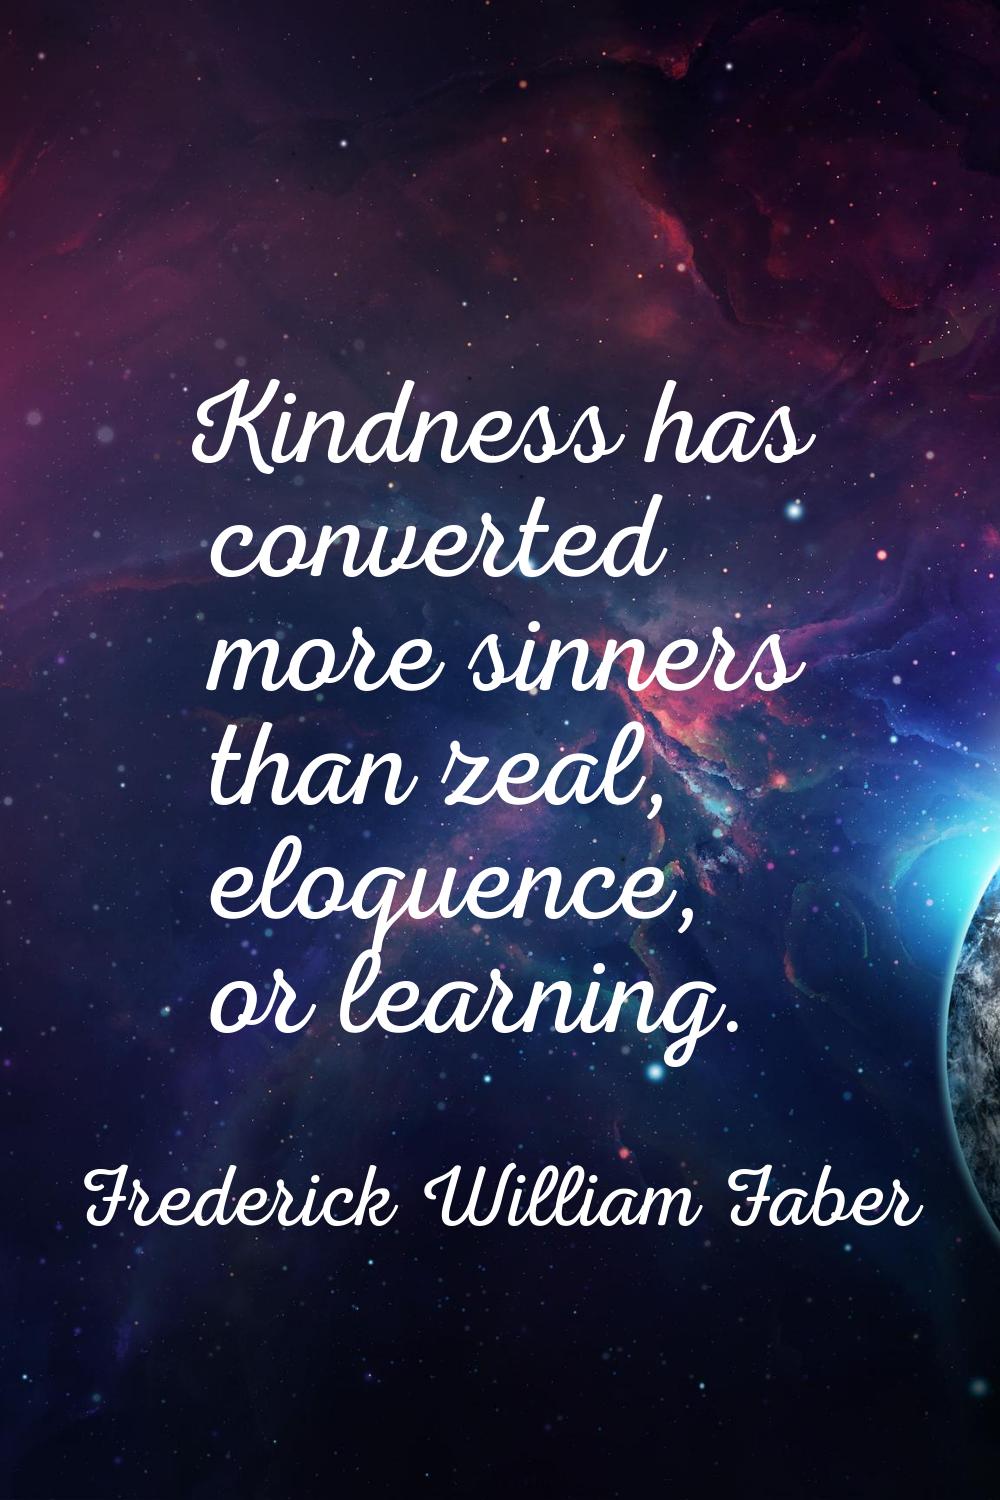 Kindness has converted more sinners than zeal, eloquence, or learning.